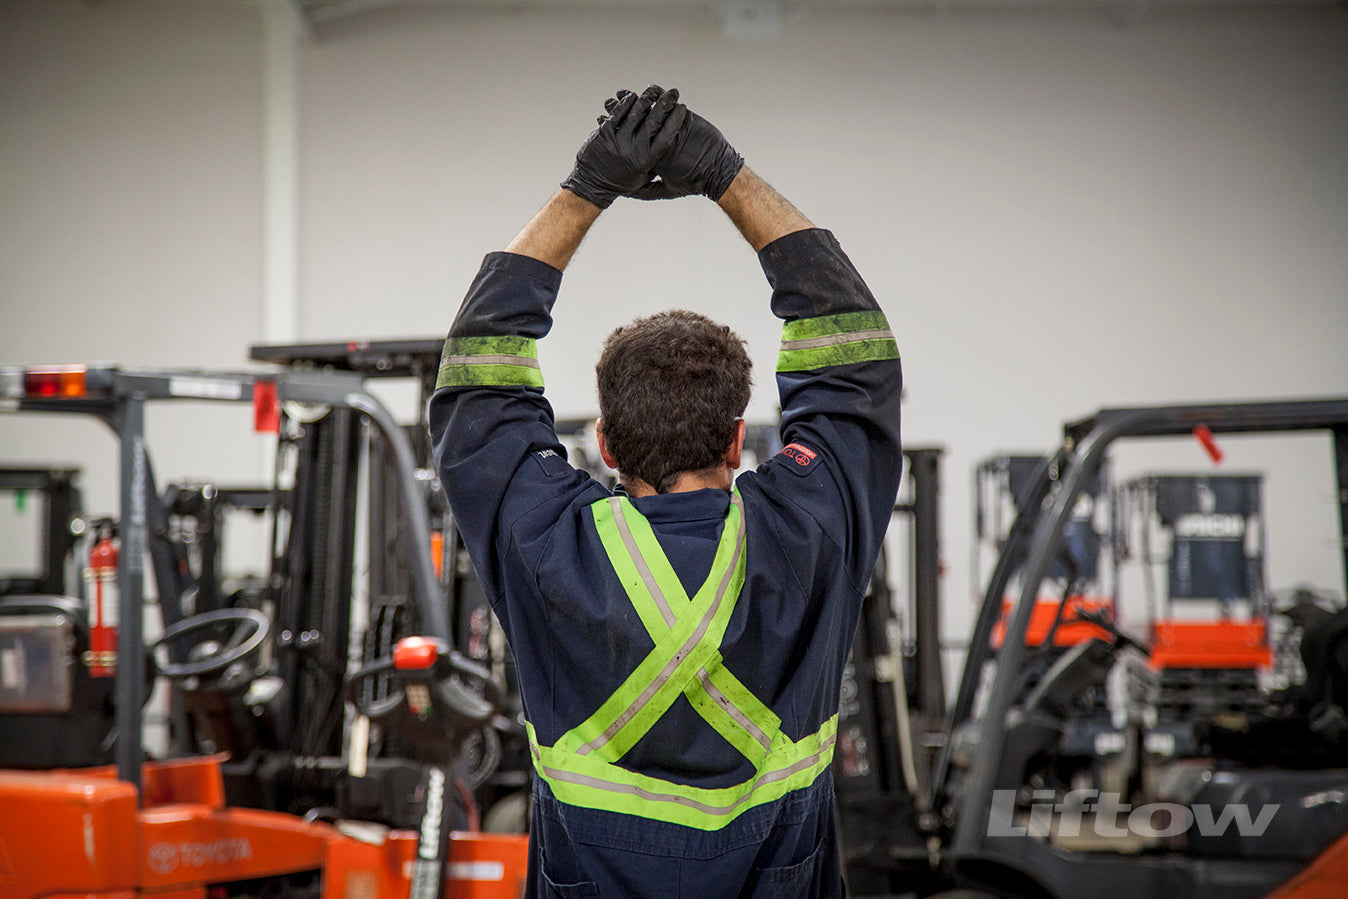 Stretching, Moving and Employee Safety